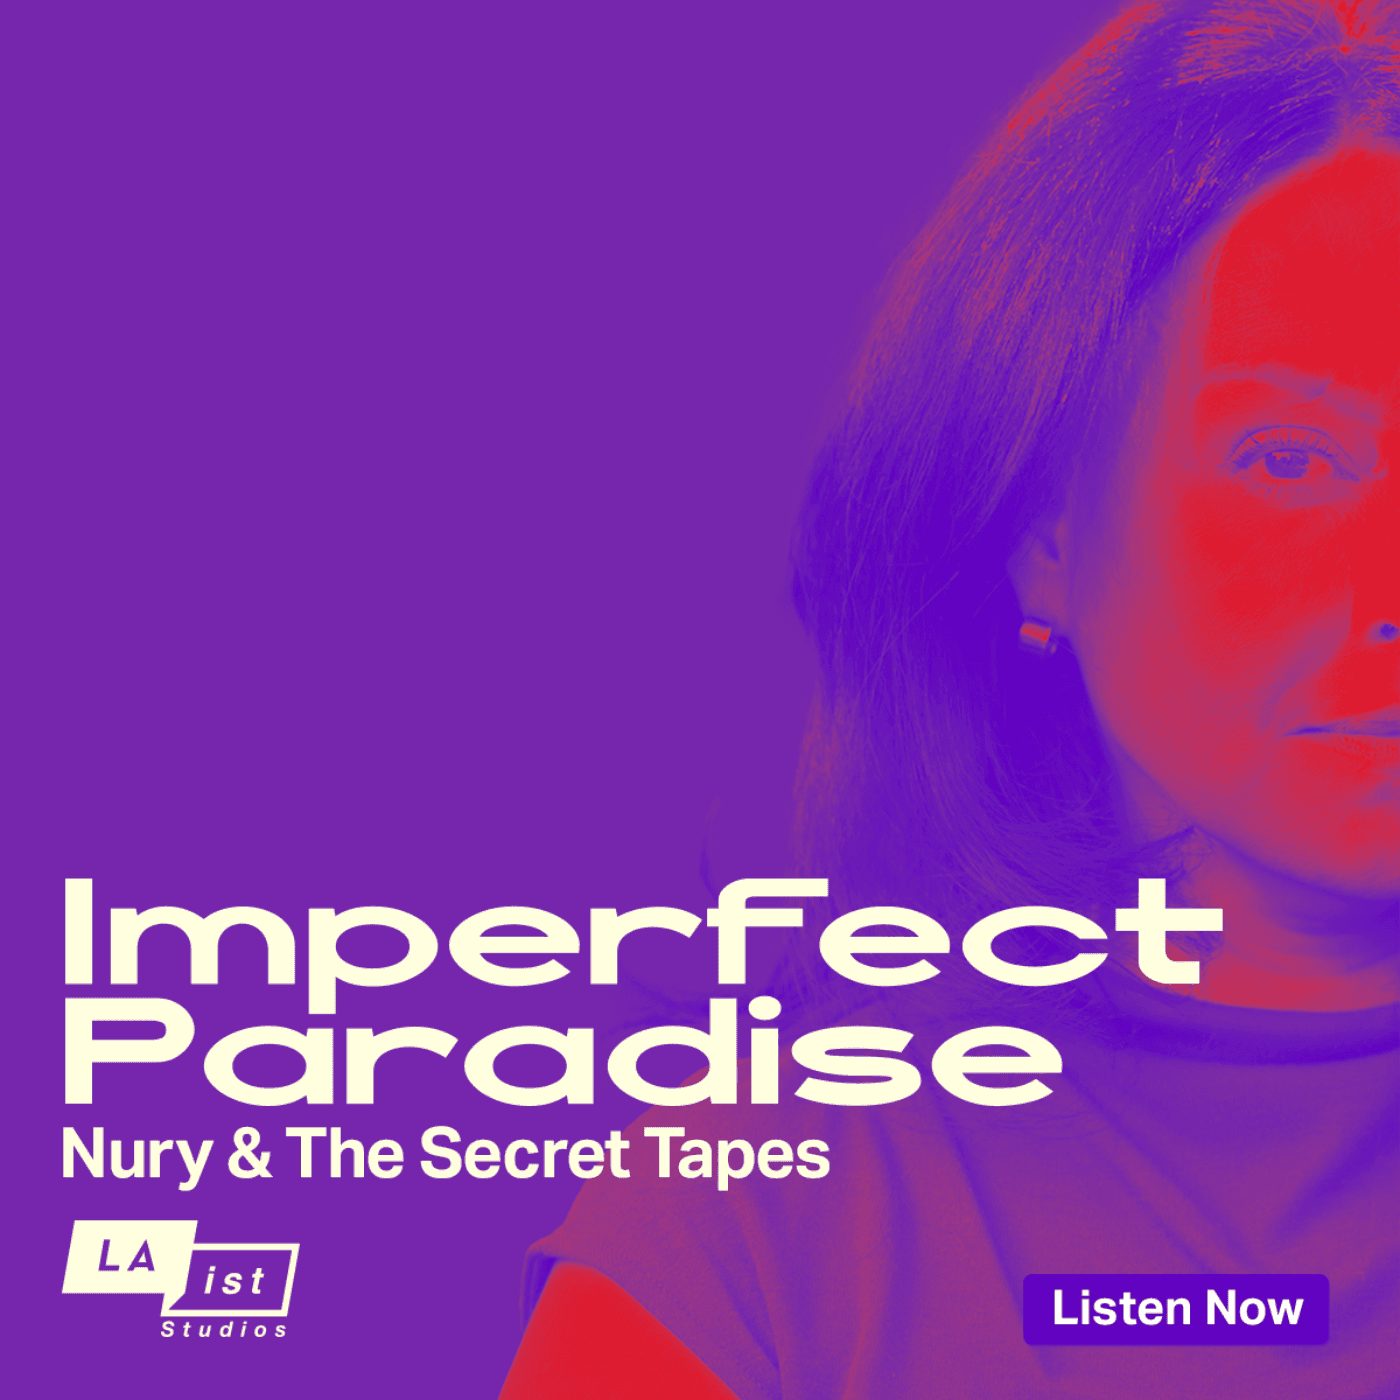 Thumbnail for "Imperfect Paradise: Nury & The Secret Tapes".